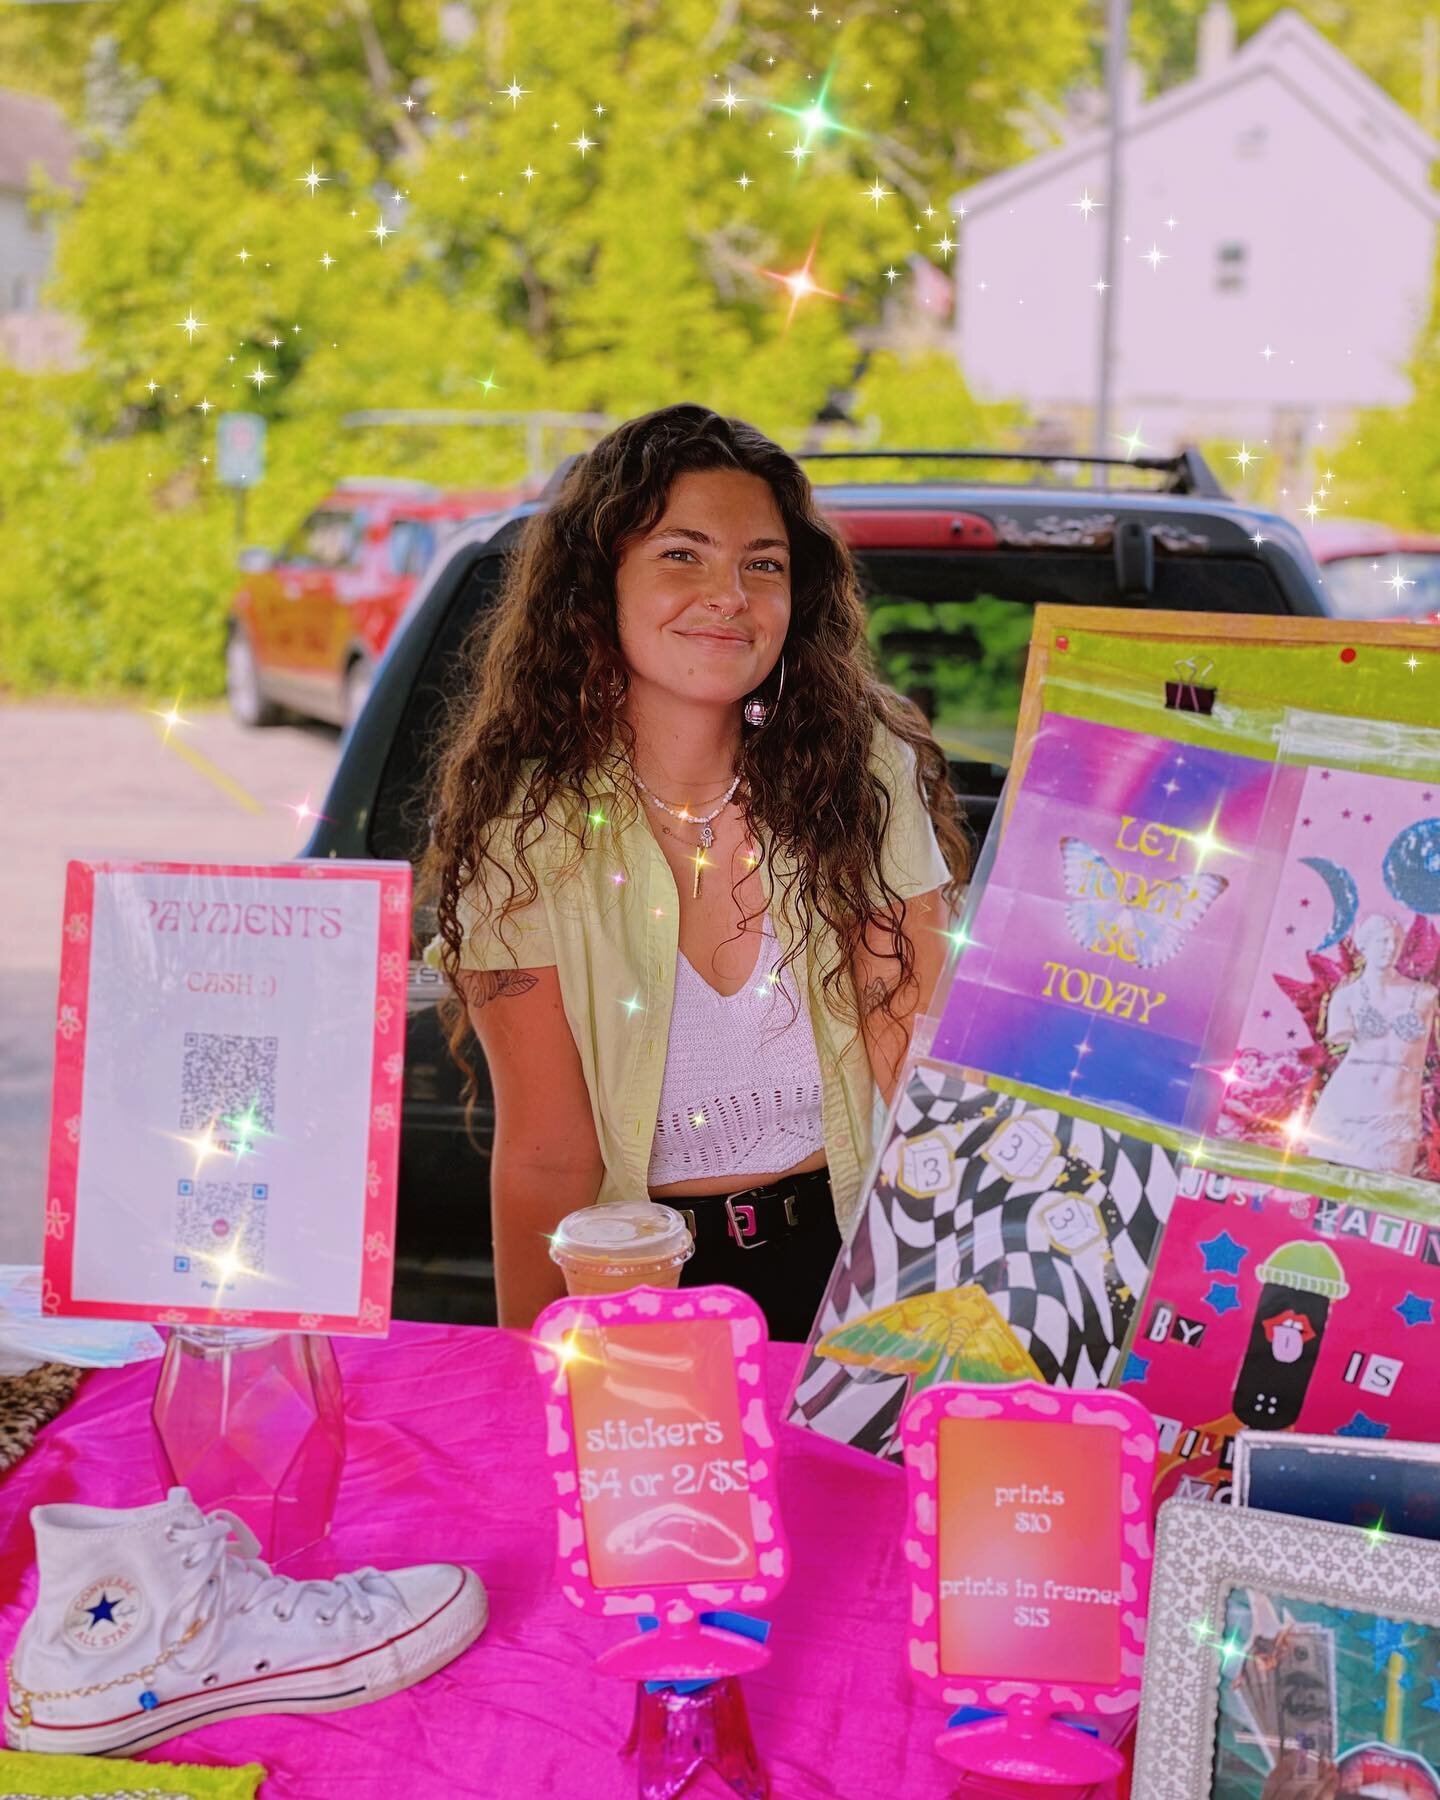 had such an amazing time at @fultonstartisansmarket yesterday 💕 overwhelmed by the outpouring of love and support from friends, family, and people I met that day! Thank you so much to everyone who bought something, stopped by to chat, grabbed a busi